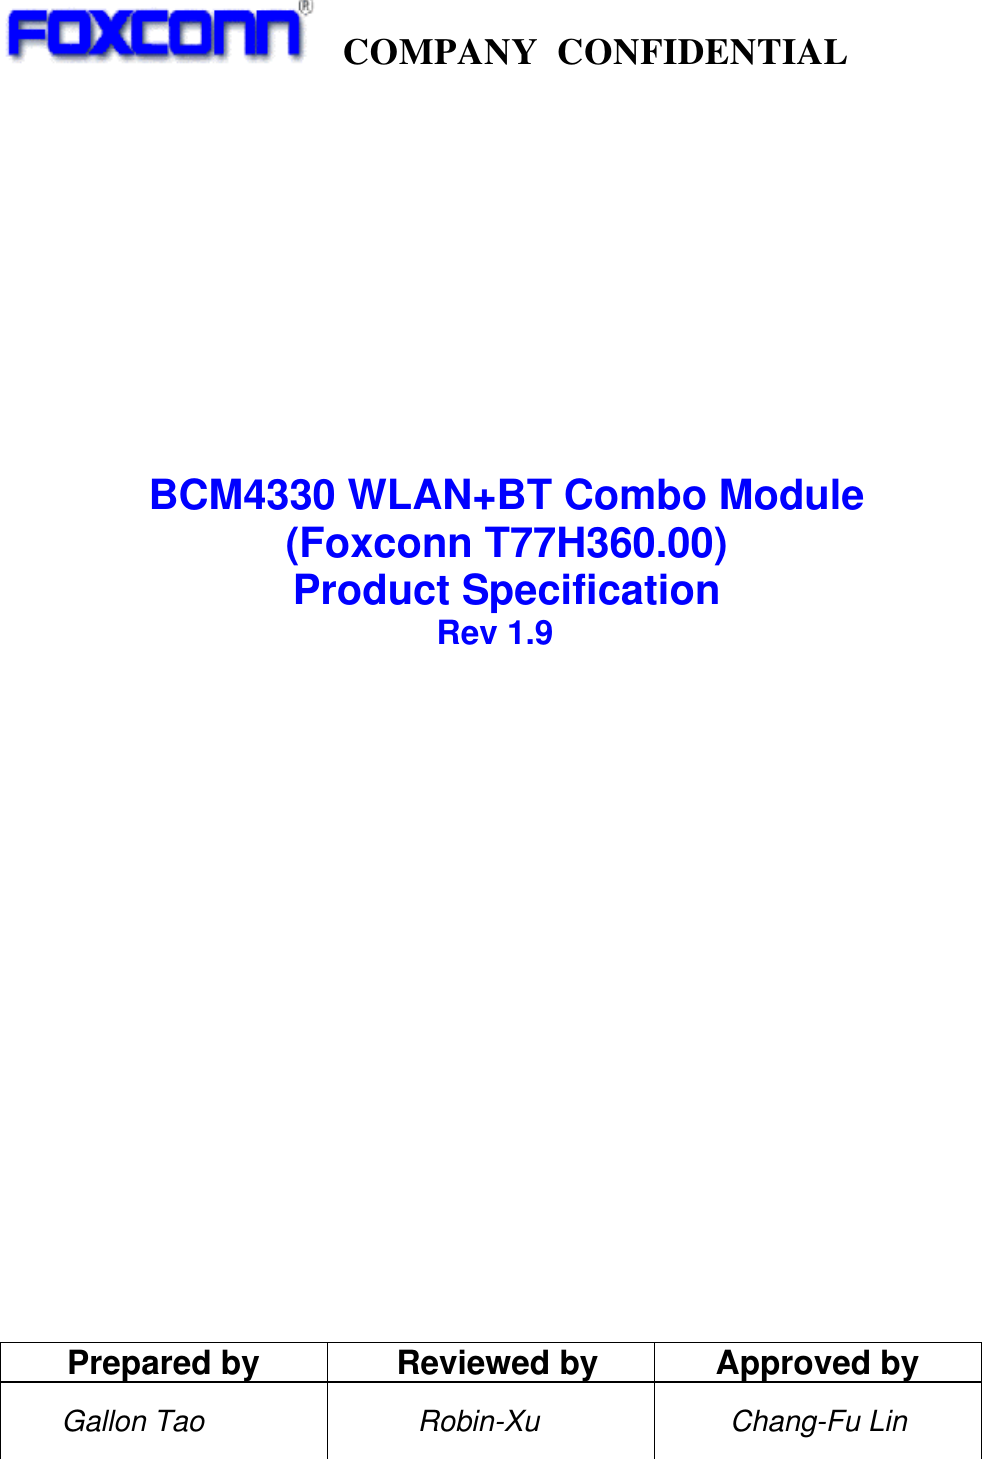   COMPANY CONFIDENTIAL                        BCM4330 WLAN+BT Combo Module (Foxconn T77H360.00) Product Specification                           Rev 1.9                       Prepared by  Reviewed by  Approved by     Gallon Tao        Robin-Xu  Chang-Fu Lin    